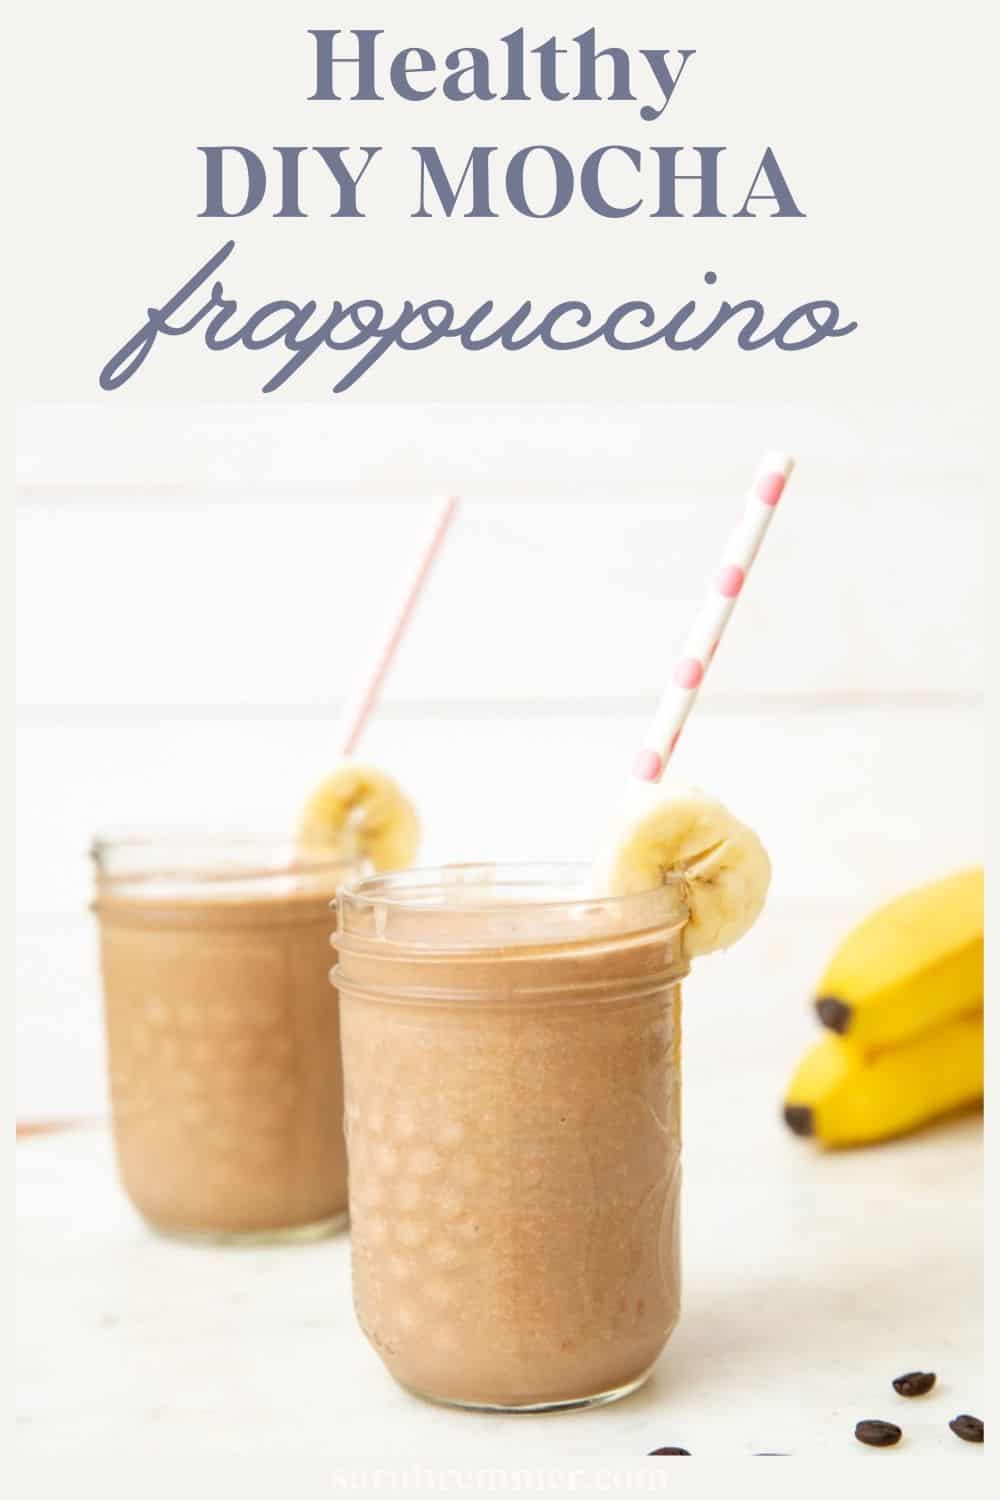 This refreshing and nutritious DIY mocha frappuccino smoothie will make you feel like you're drinking the Starbucks version, only better and healthier!